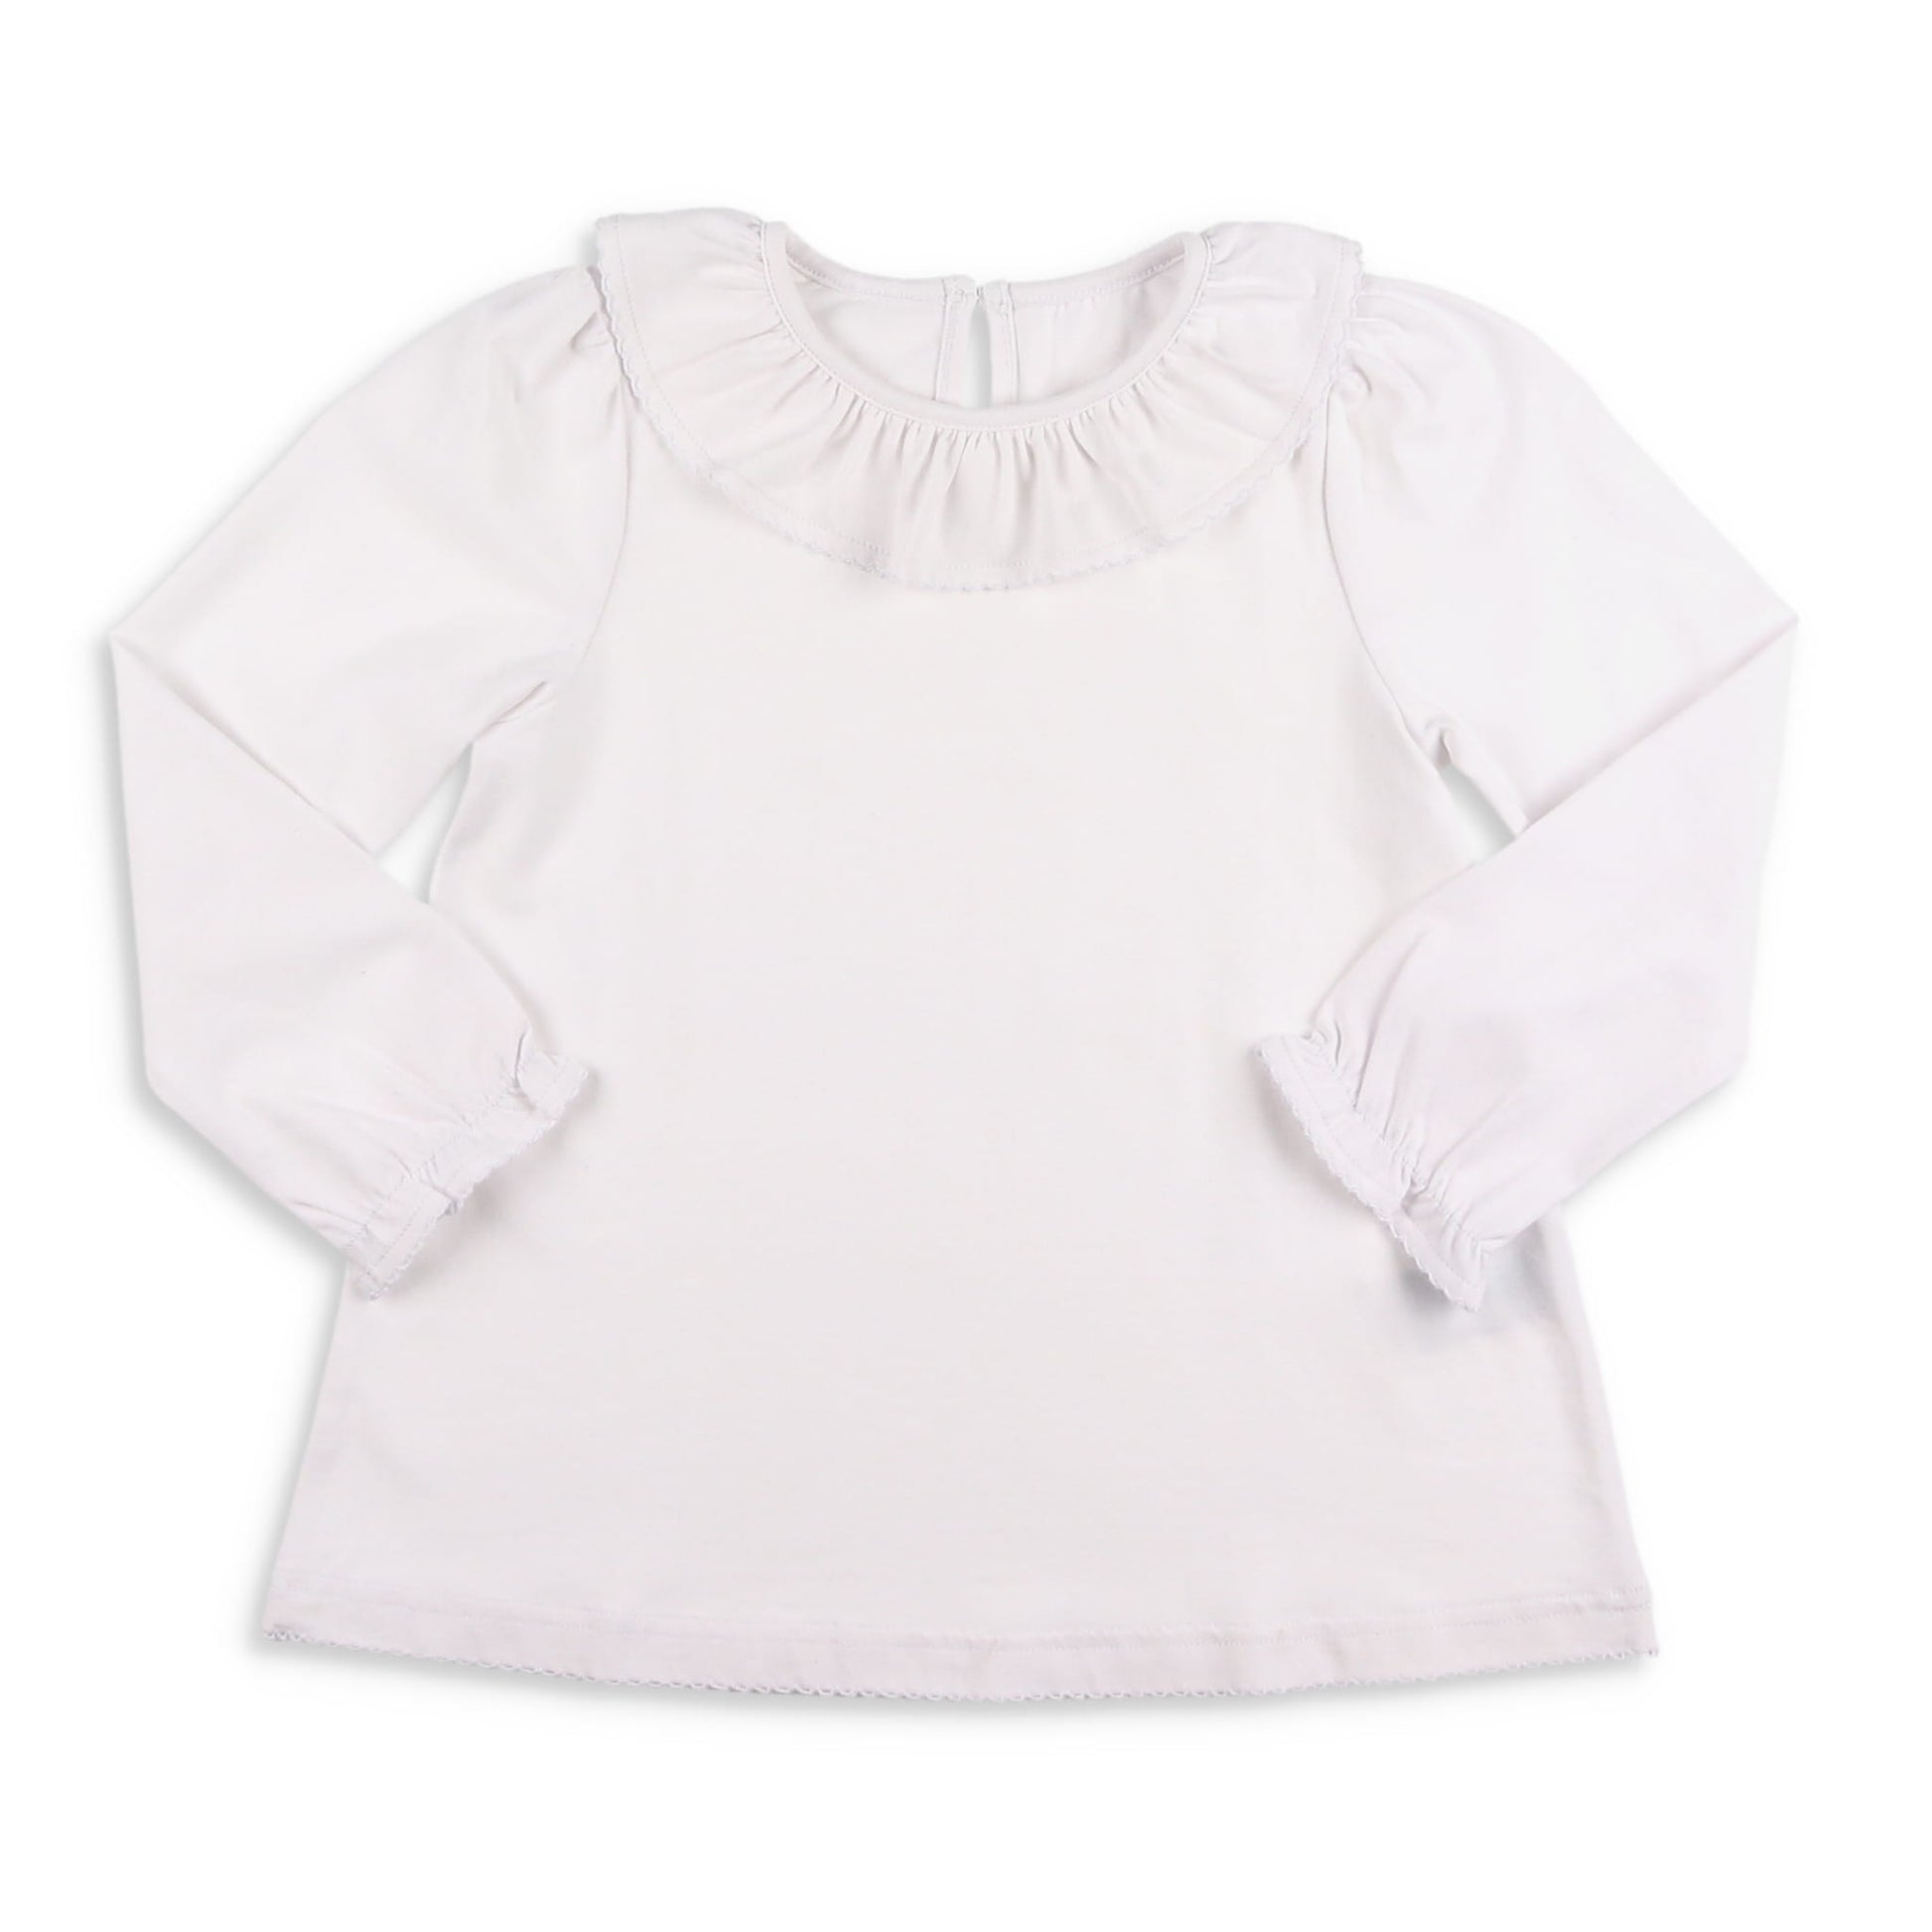 Girls Long Ruffle Grits and Neck Sleeve Top Kids - Shrimp